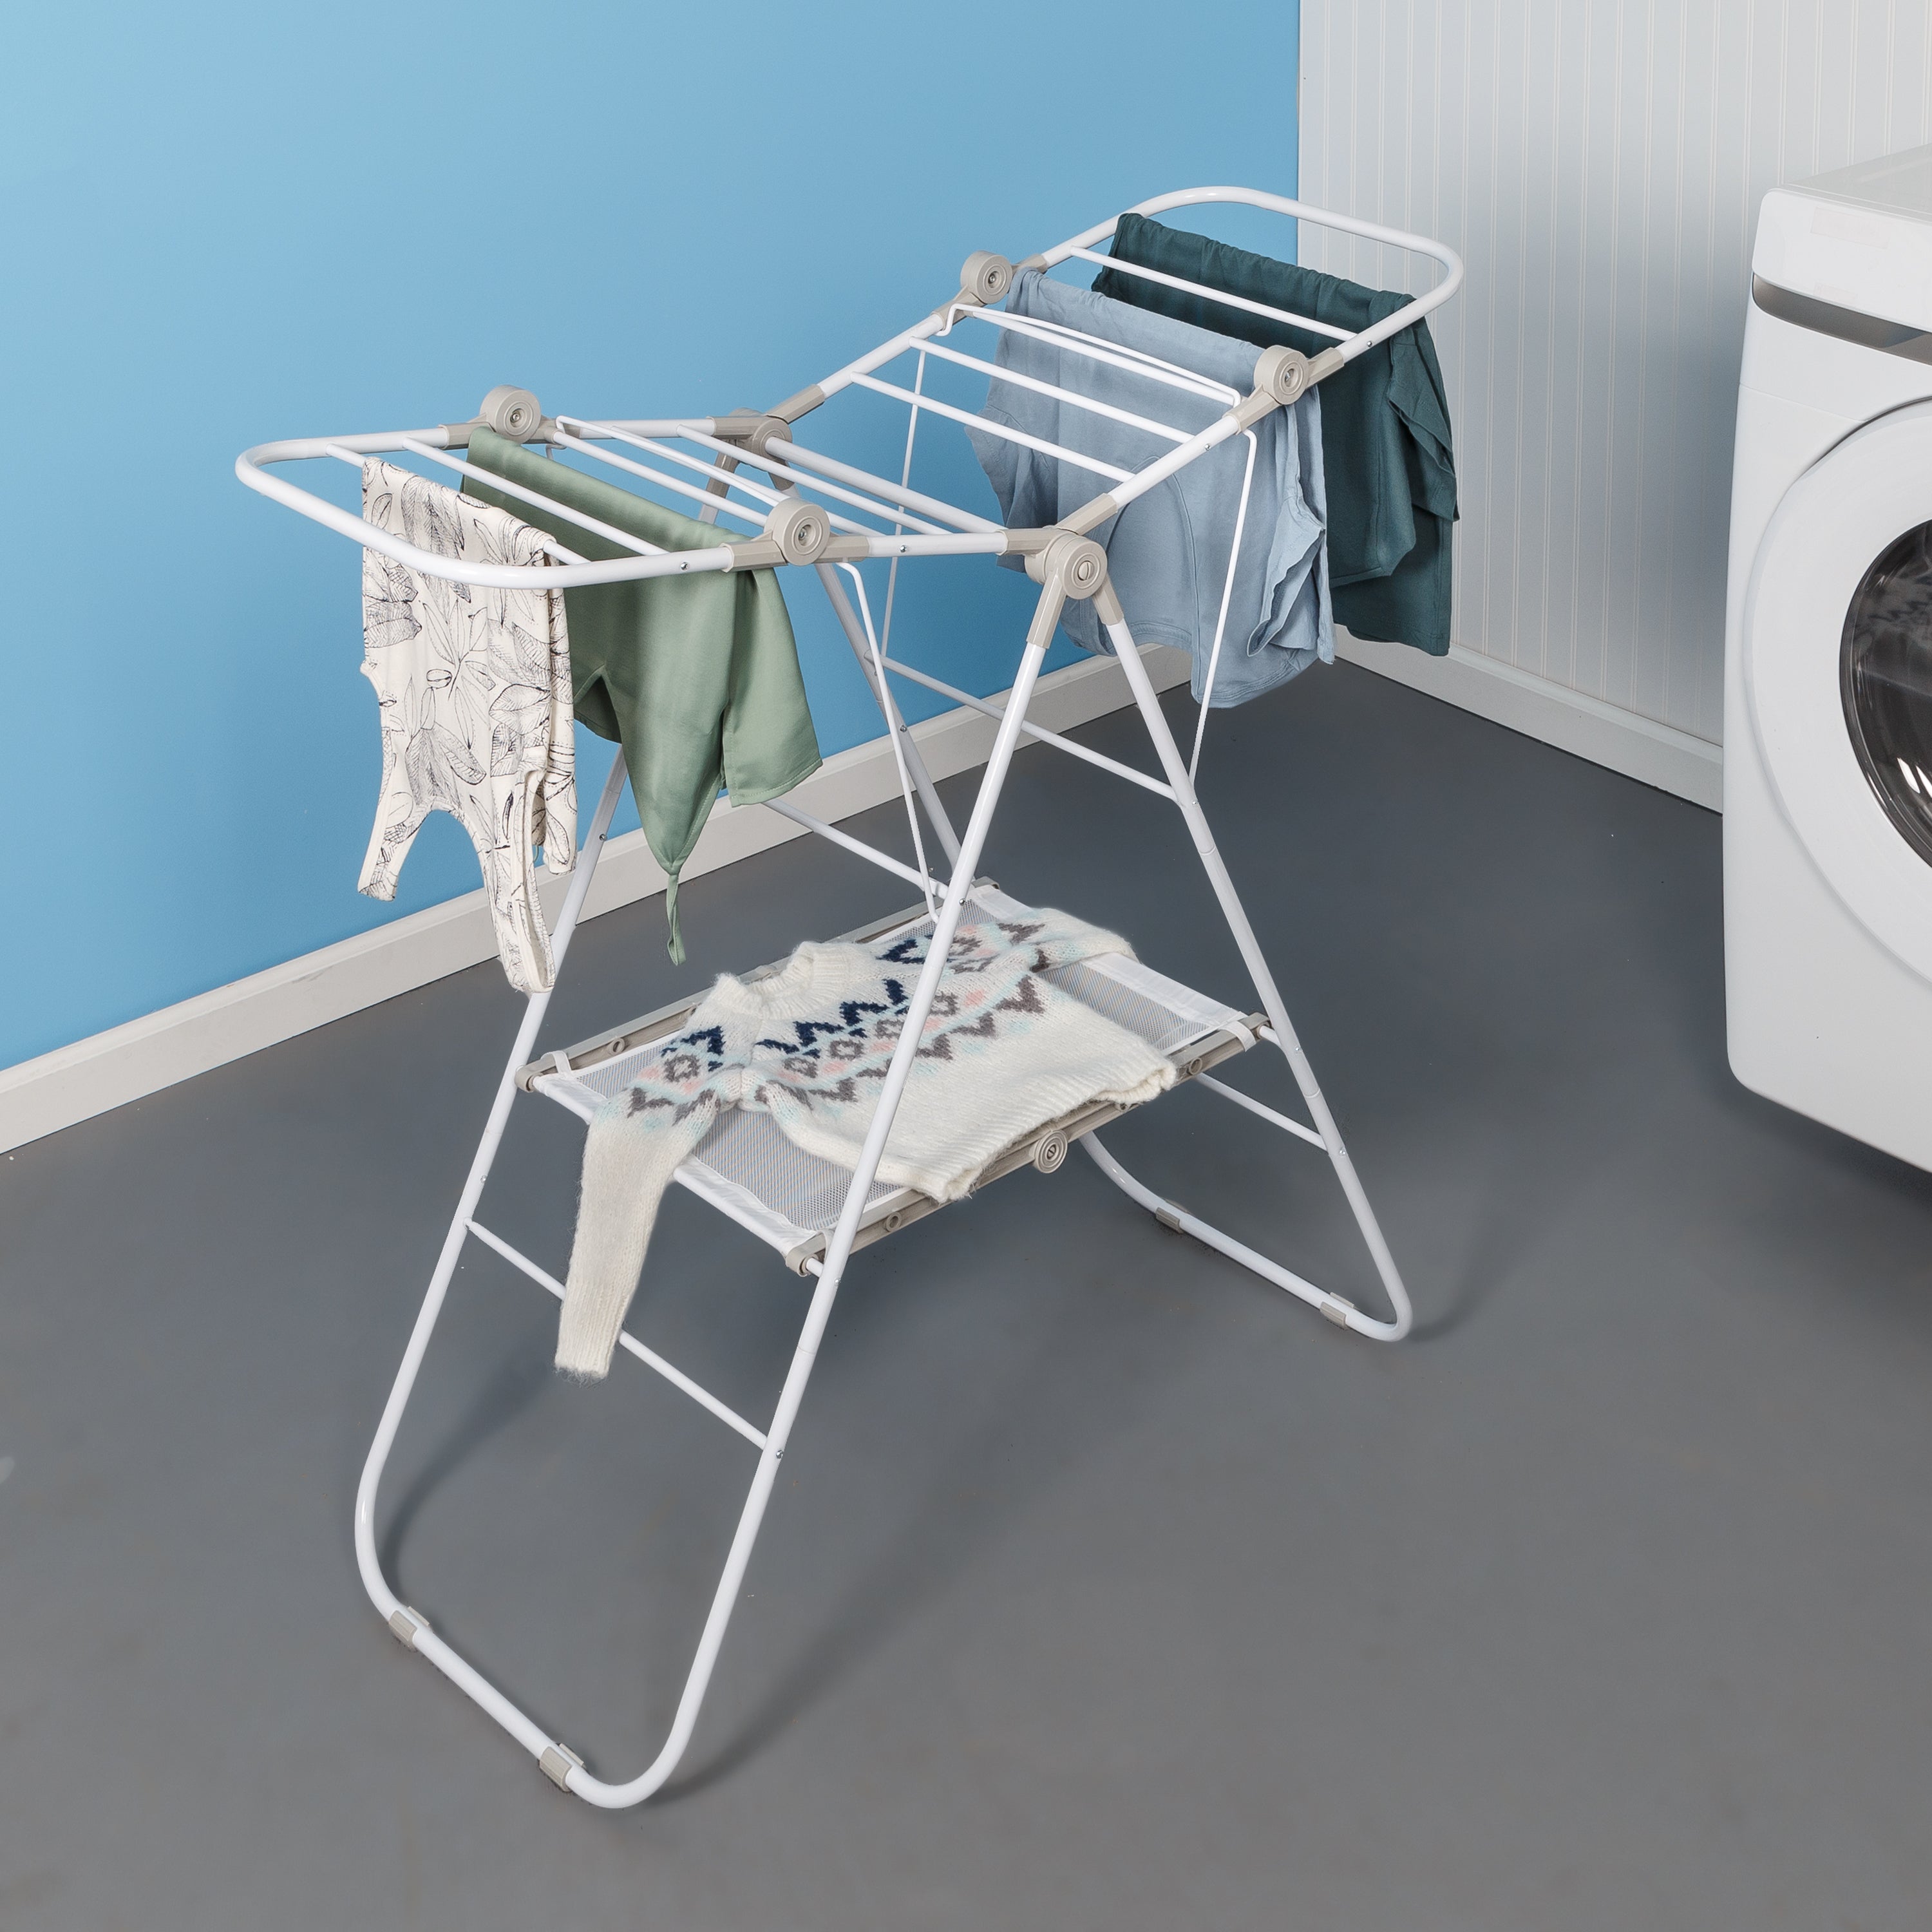 10 Space-Saving Drying Racks for Small Spaces  Laundry room drying rack, Drying  rack laundry, Diy clothes drying rack